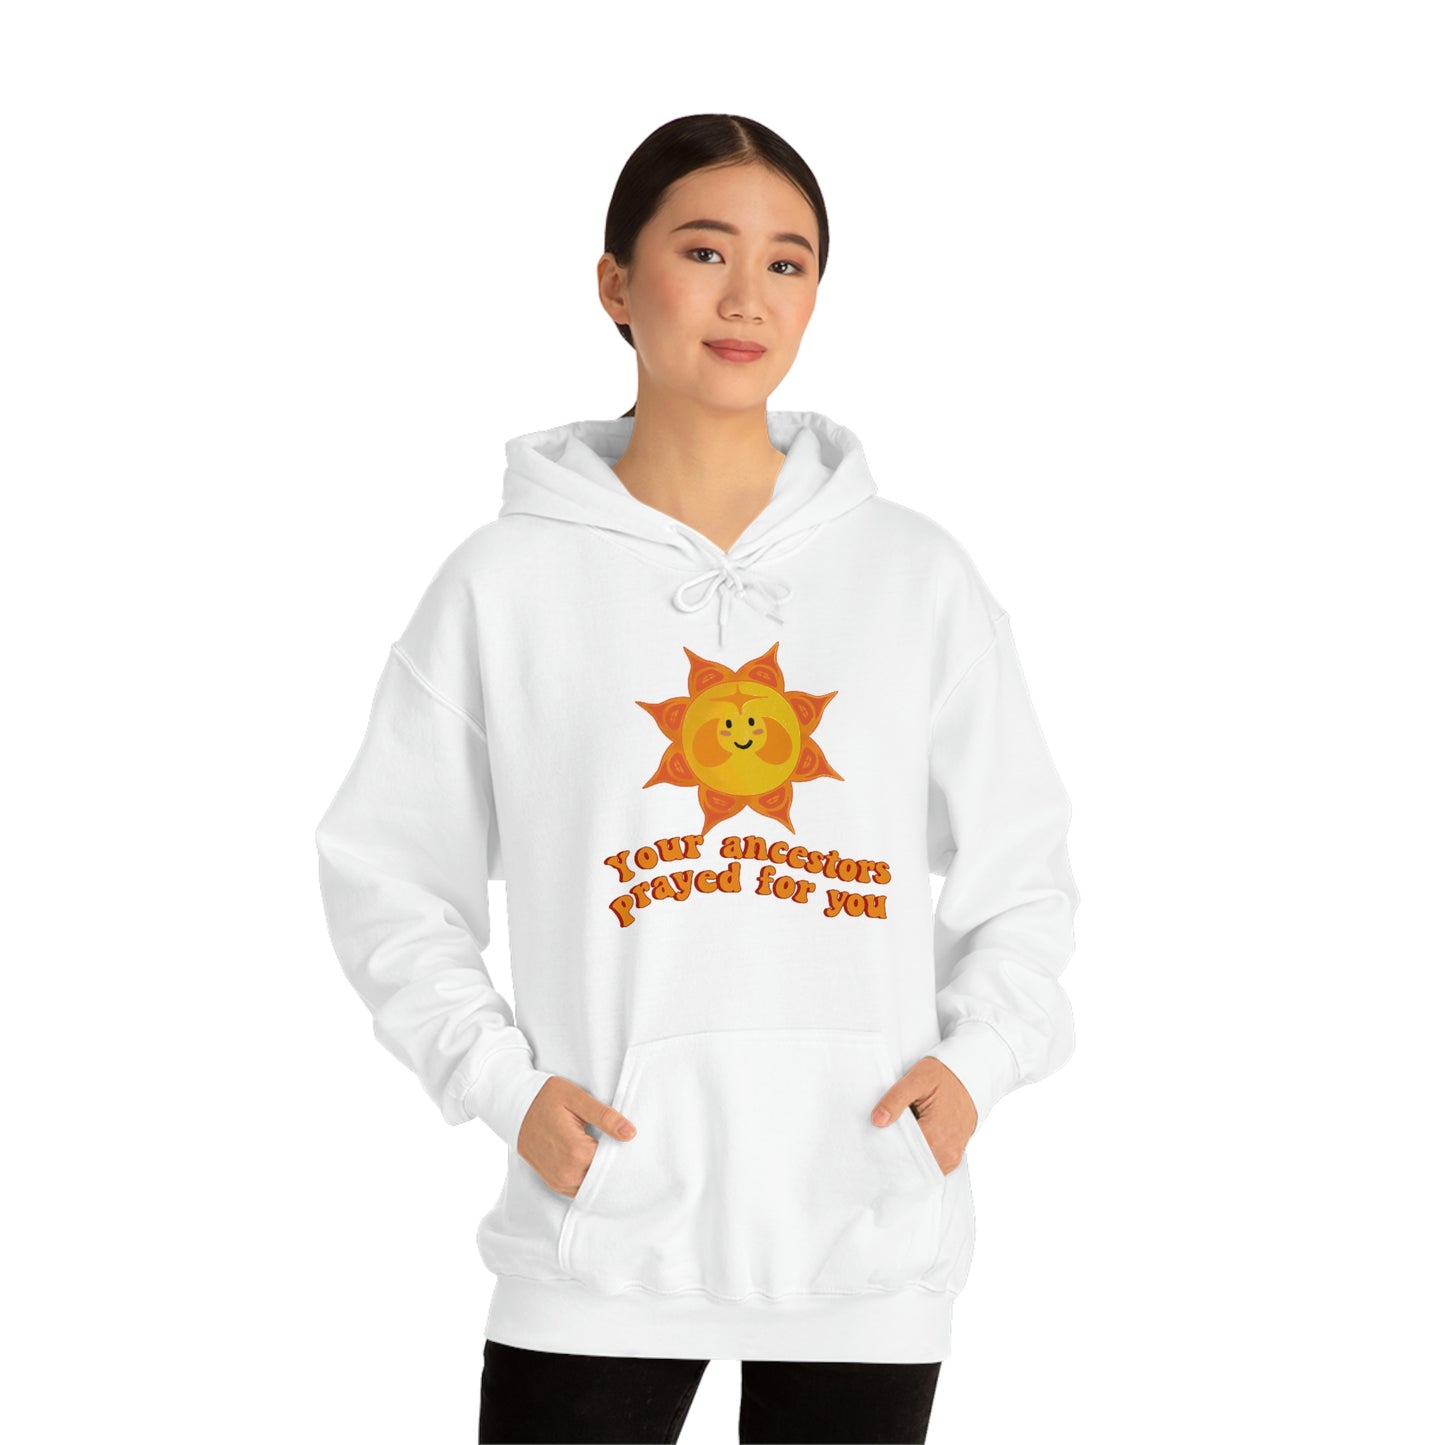 Your Ancestors Prayed For You Hoodie